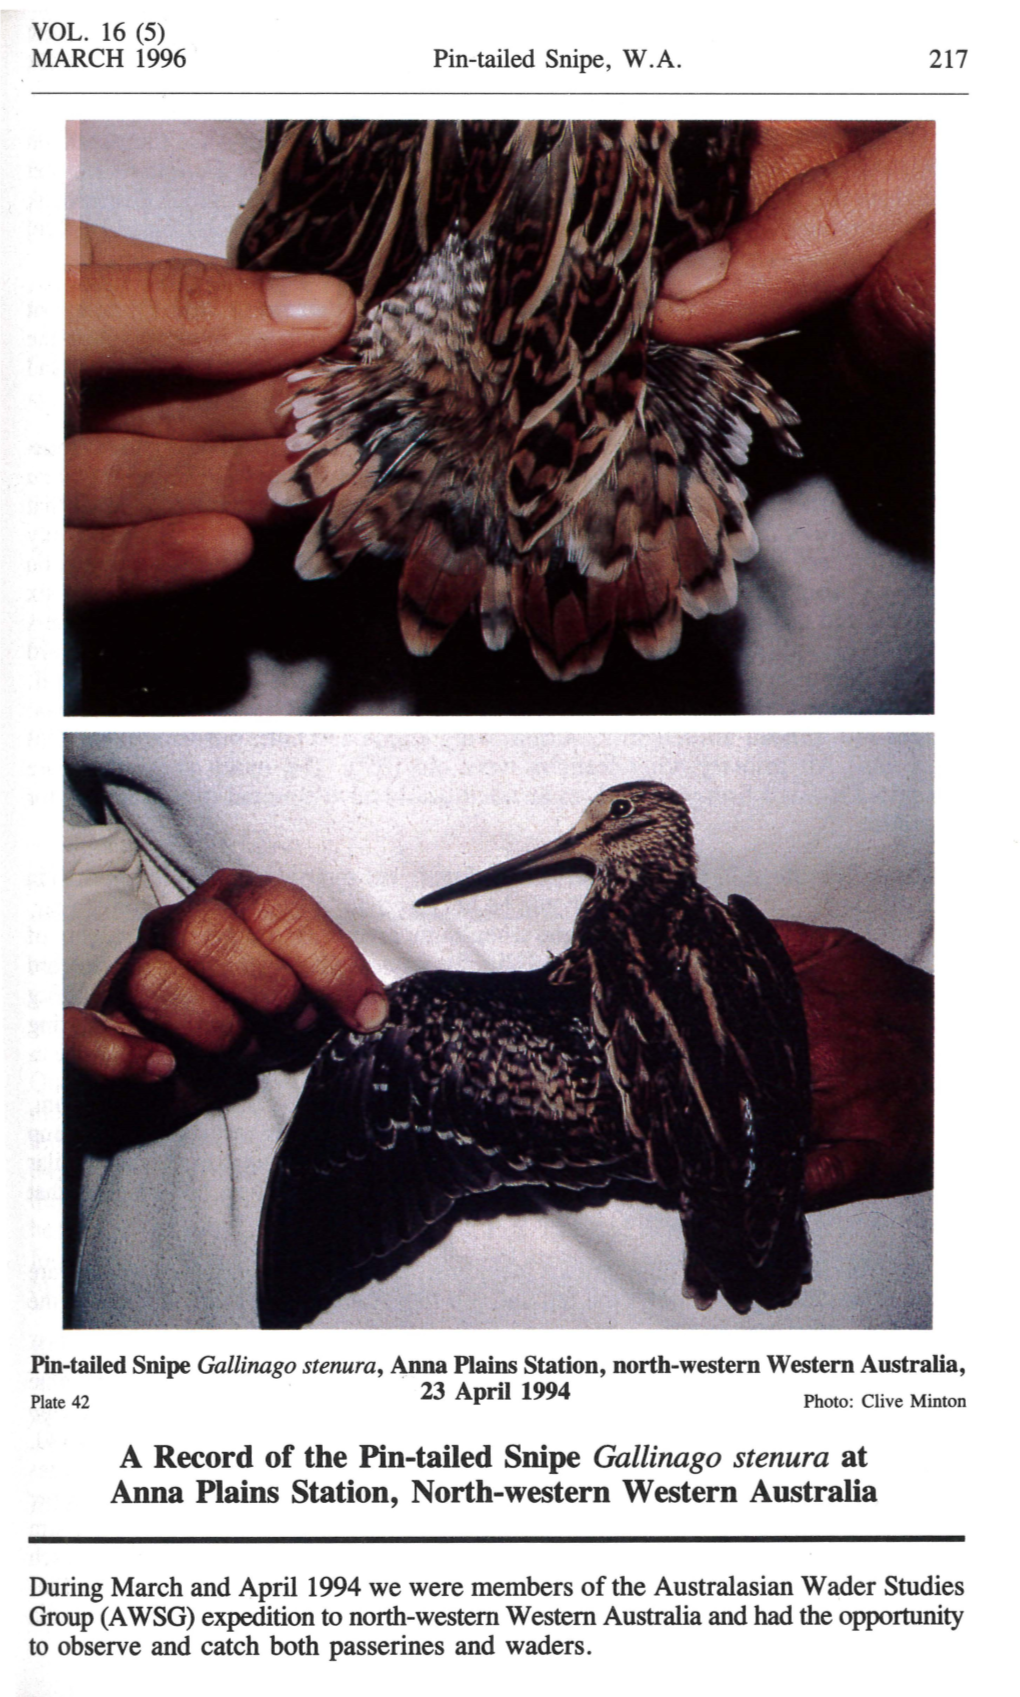 A Record of the Pin-Tailed Snipe Gallinago Stenura at Anna Plains Station, North-Western Western Australia